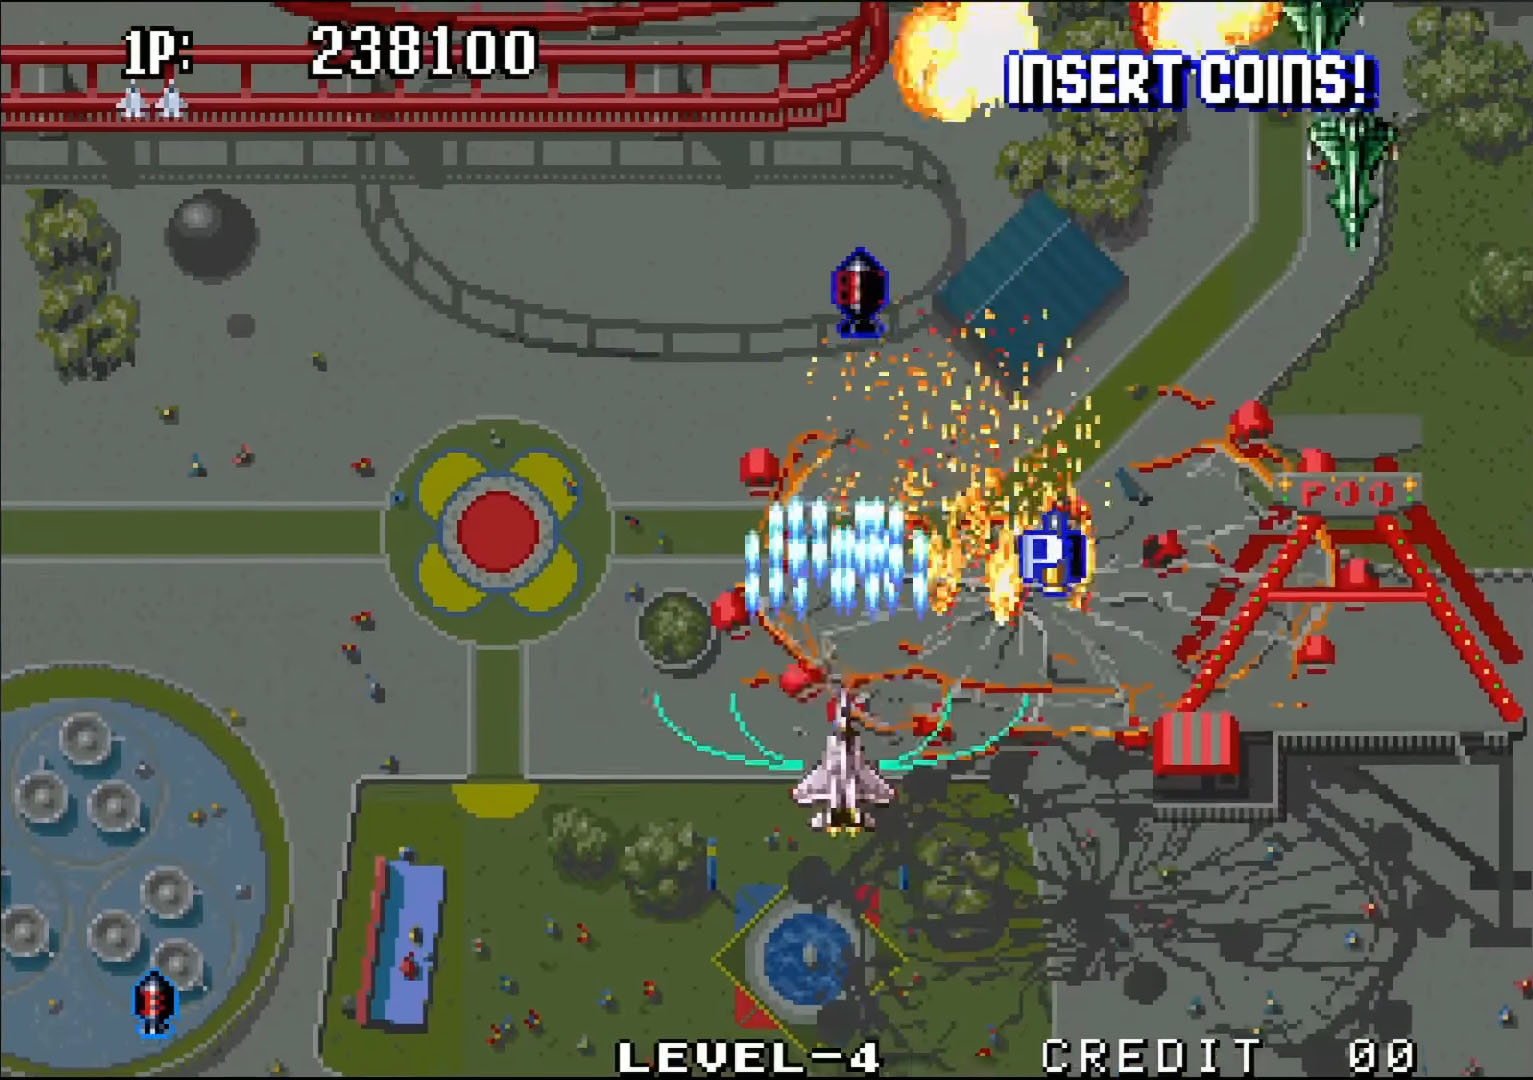 Download AERO FIGHTERS 2 ACA NEOGEO Android free game.